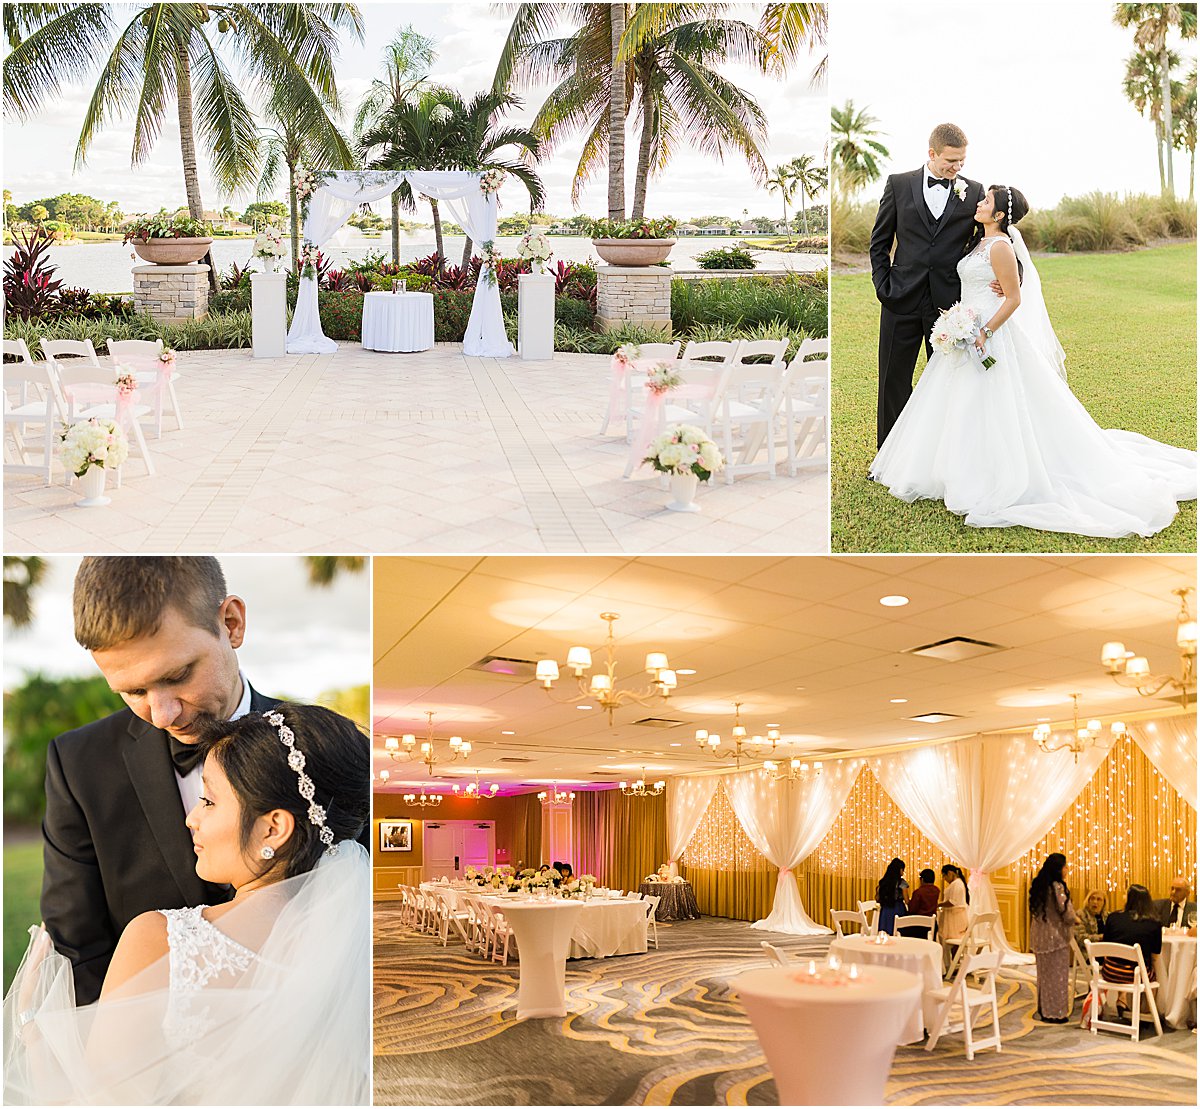 Classic and Elegant Wedding at PGA National Resort | Married in Palm Beach | www.marriedinpalmbeach.com | Paper Tree Photography